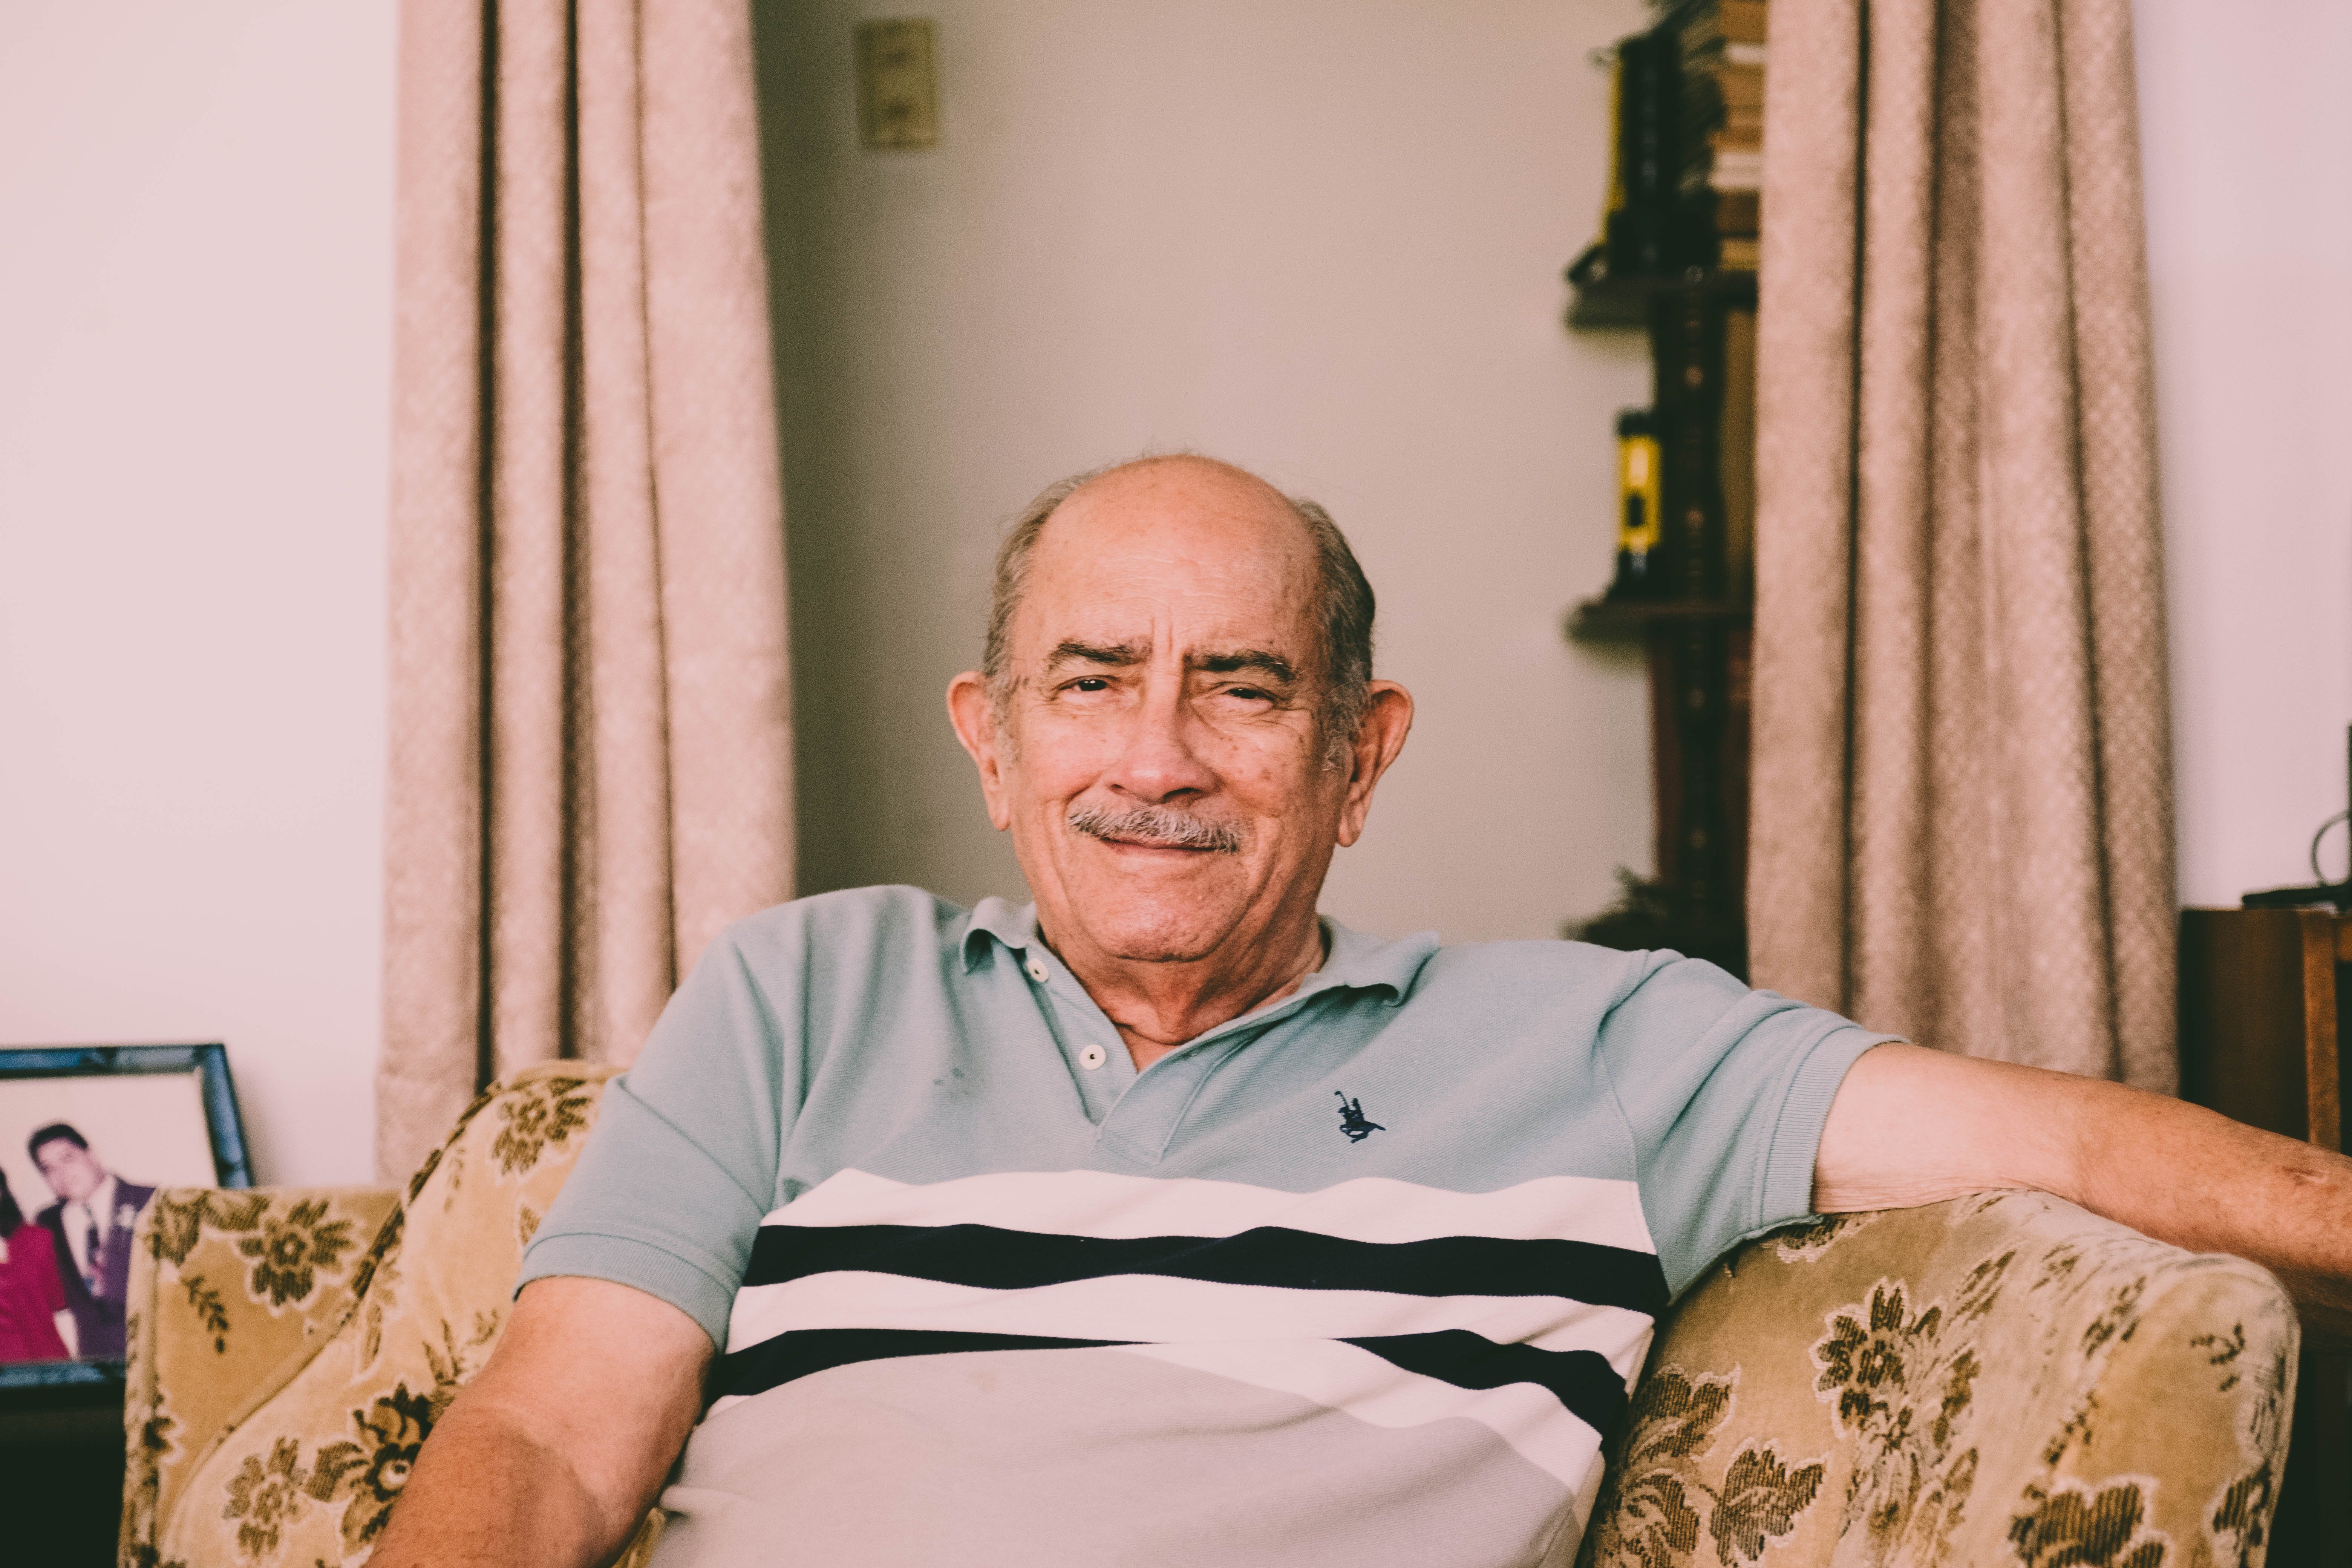 An elderly man sitting on a couch. | Pexels/ Steshka Willems